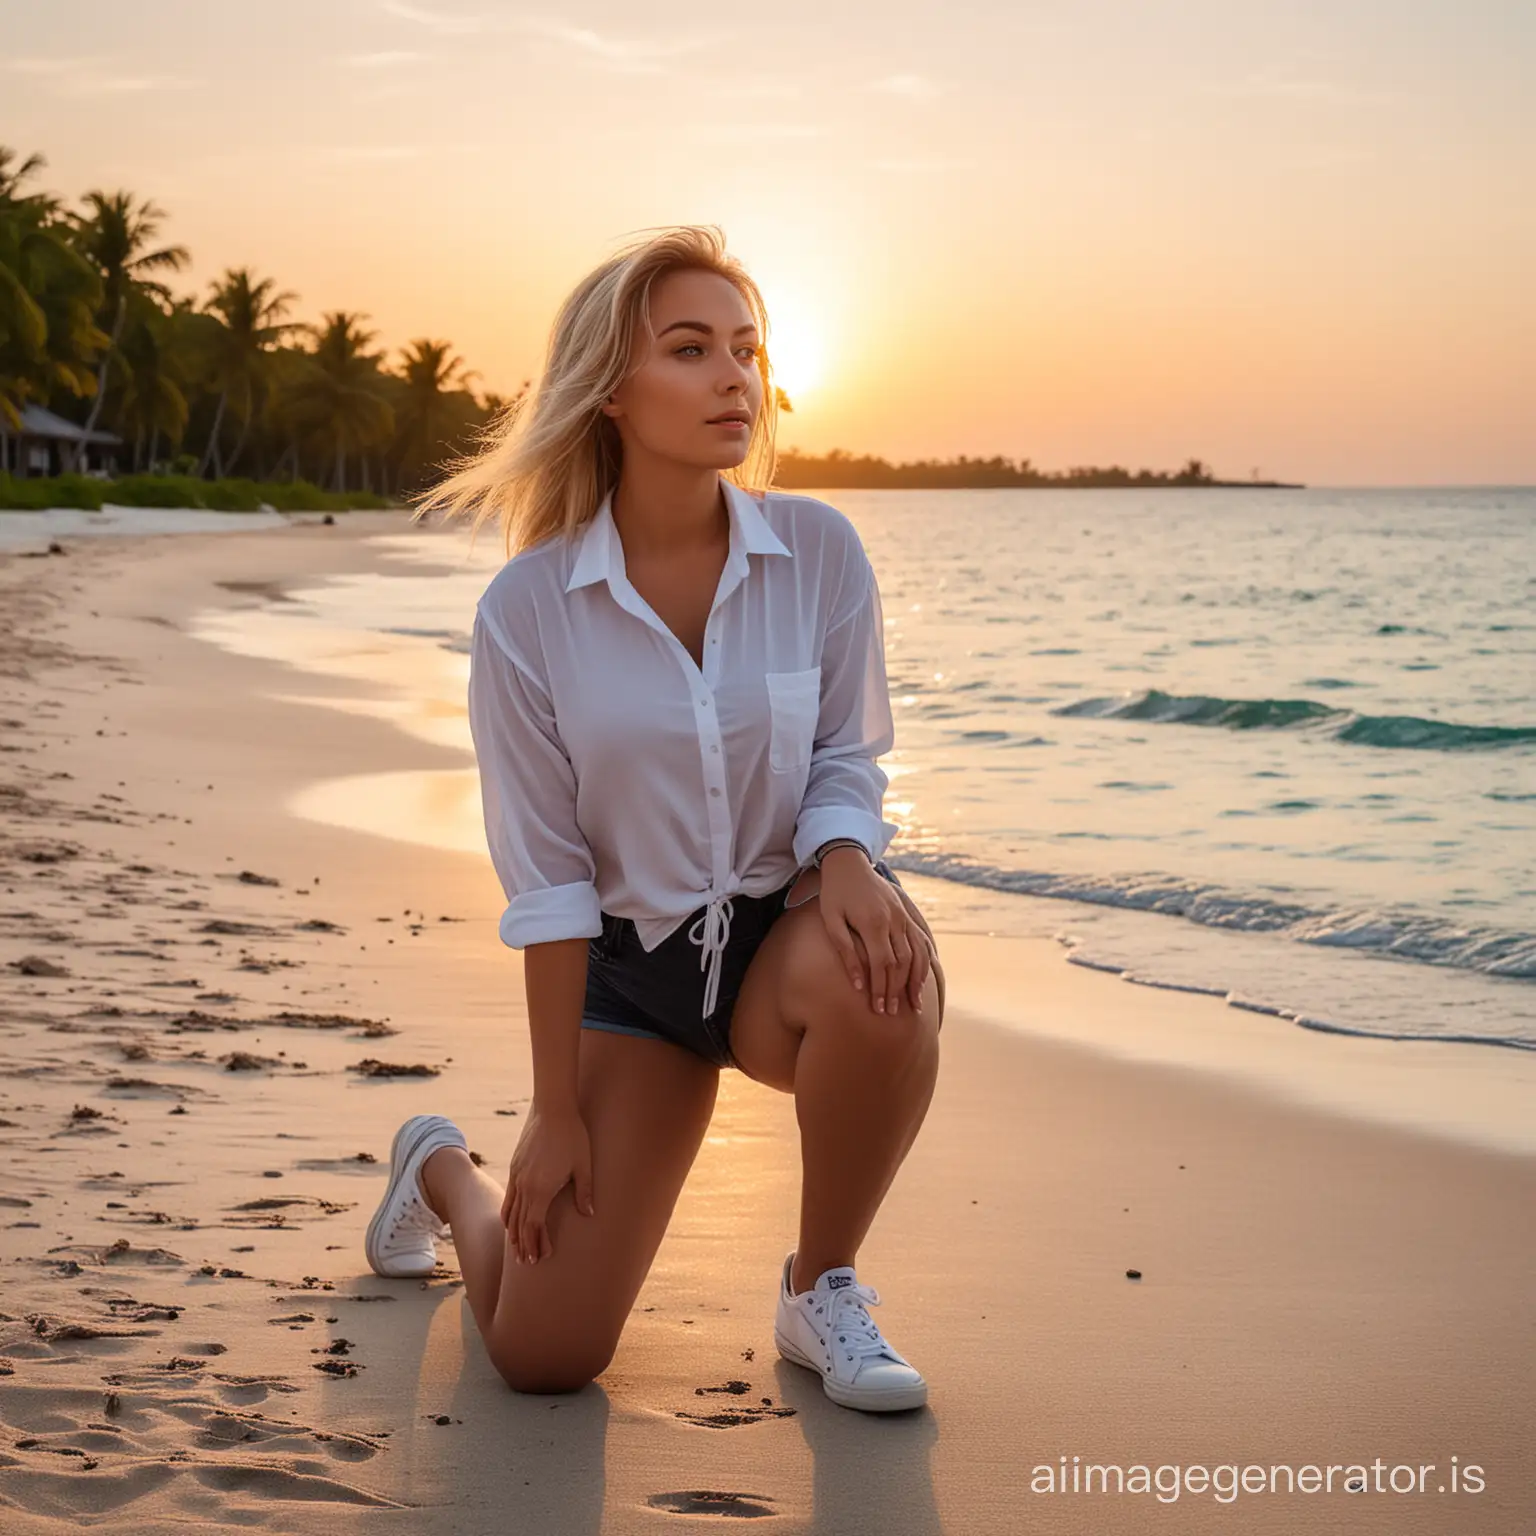 Image: cute blonde curvy girl on full body view. Position: Kneeling in doggy pose. 
She is  Wearing: white Shirt, black pantyhose, sneakers, jorts. Sunset Maldives beach.